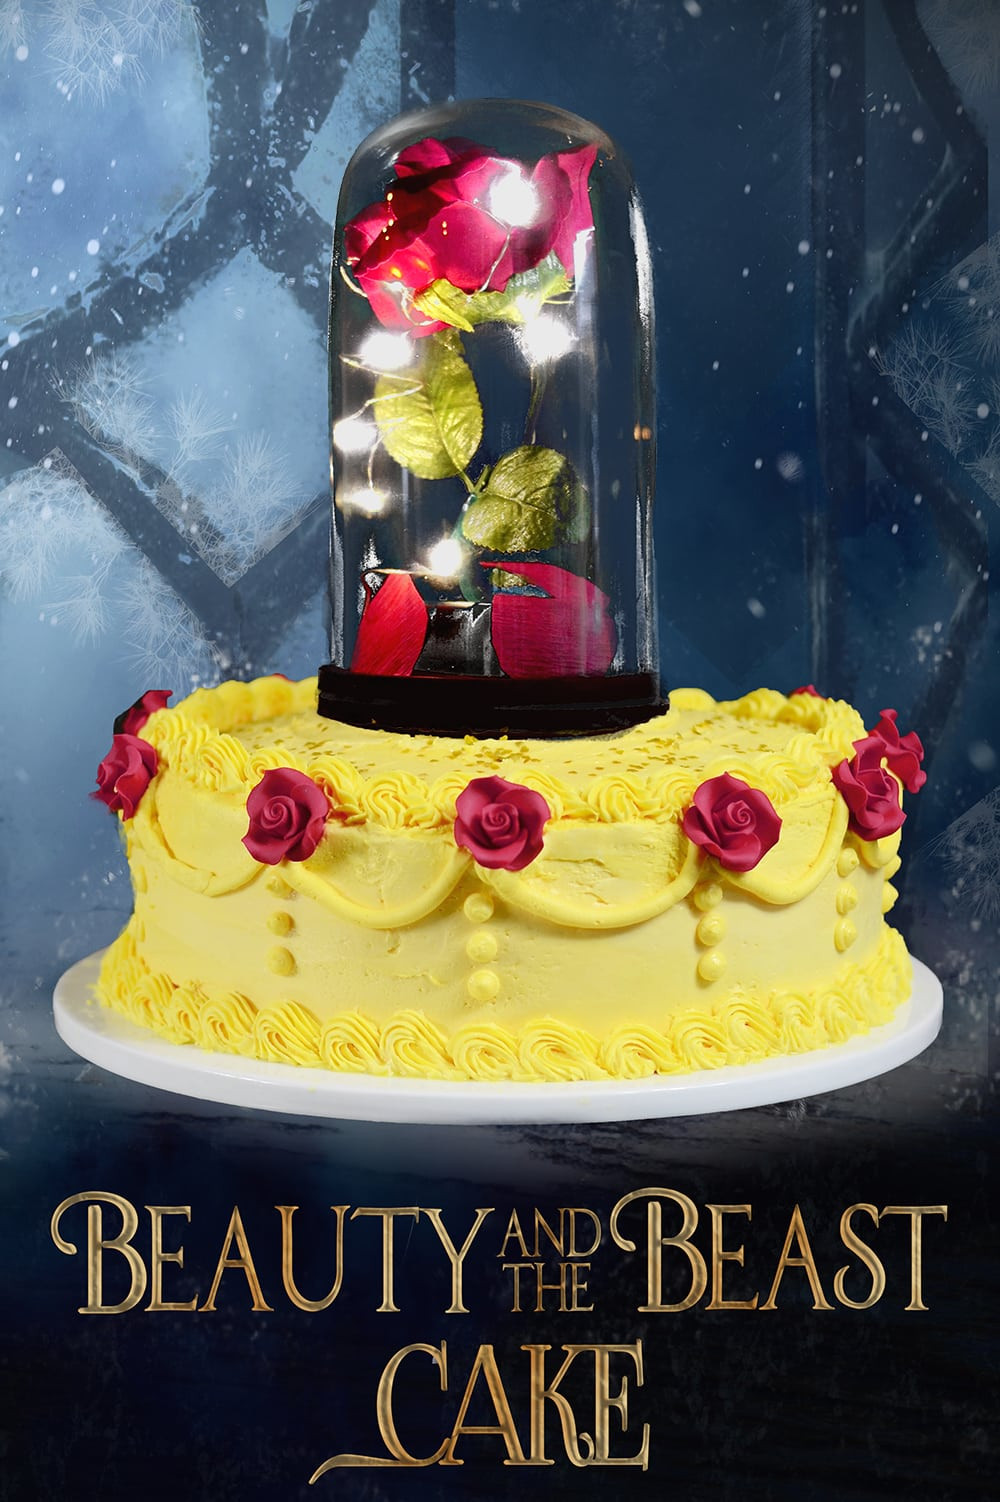 The Most Shared Beauty and the Beast Birthday Cake
 Of All Time